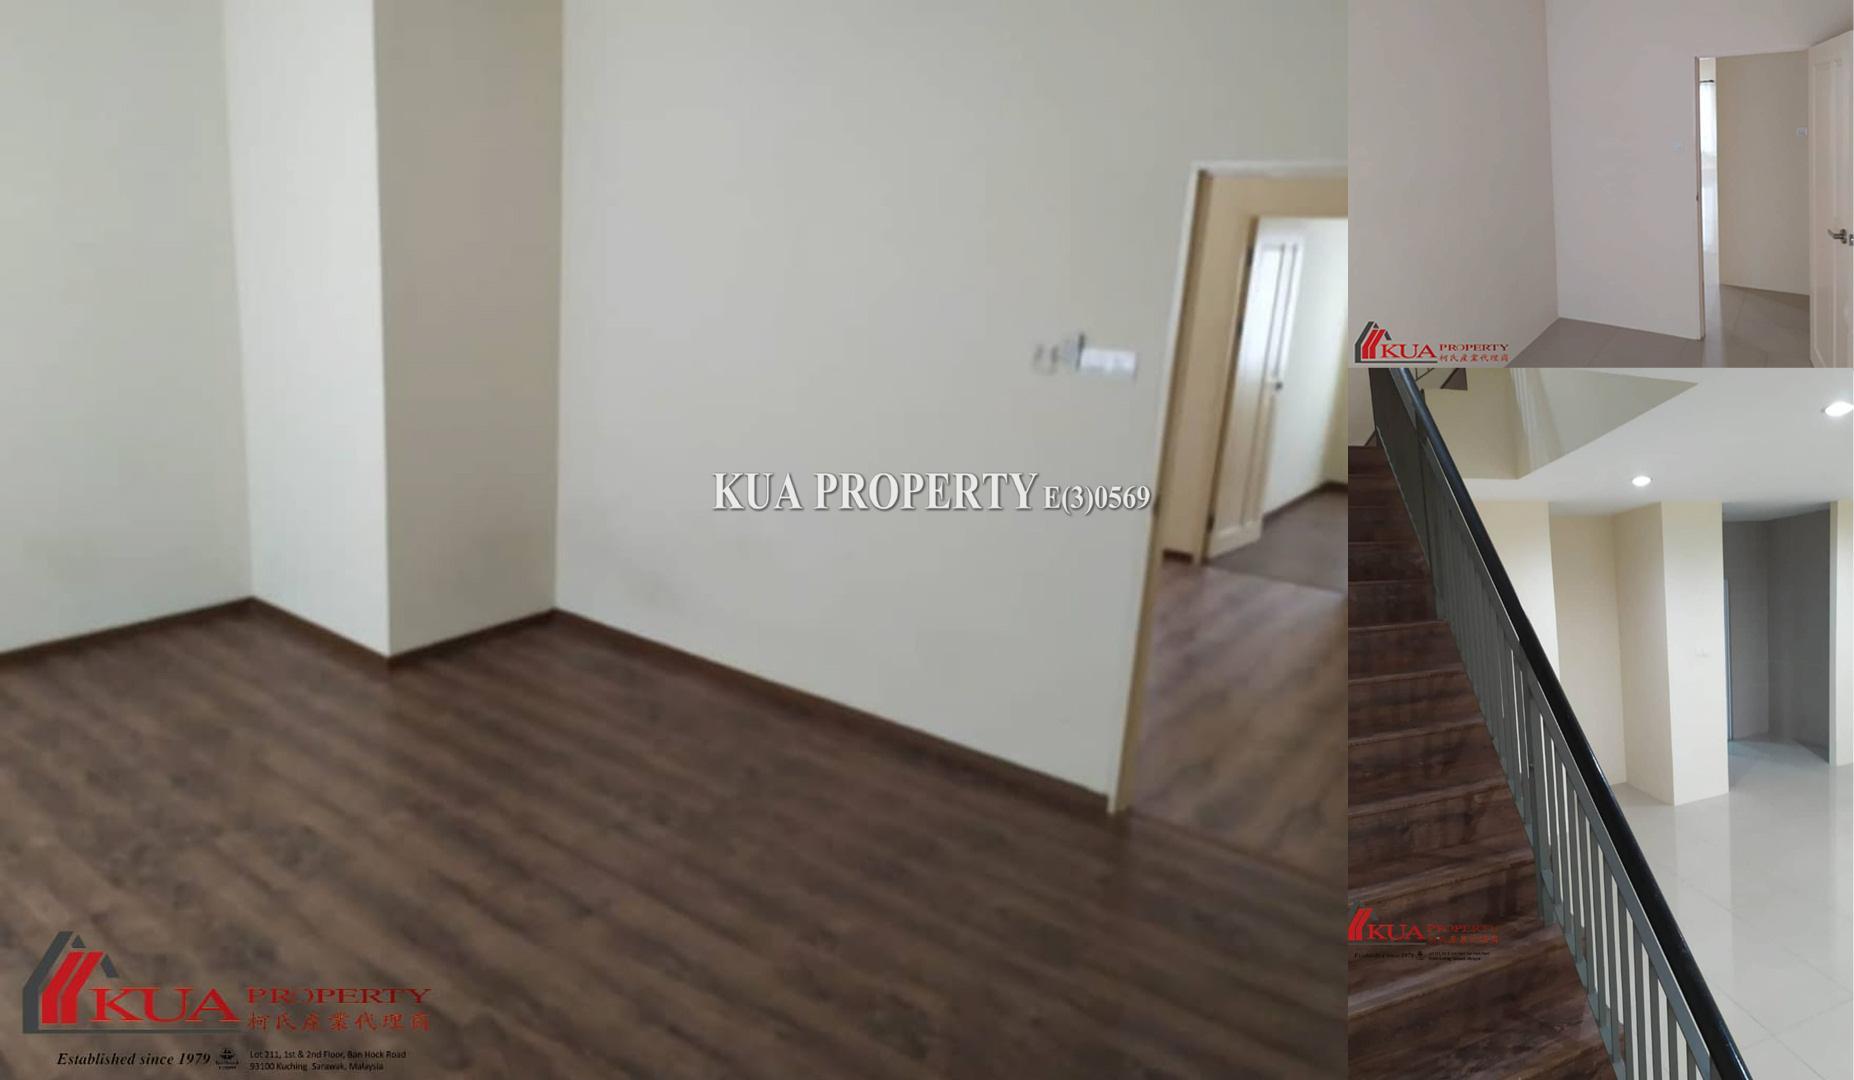 Double Storey Intermediate House For Rent! at Tabuan Tranquility, Kuching